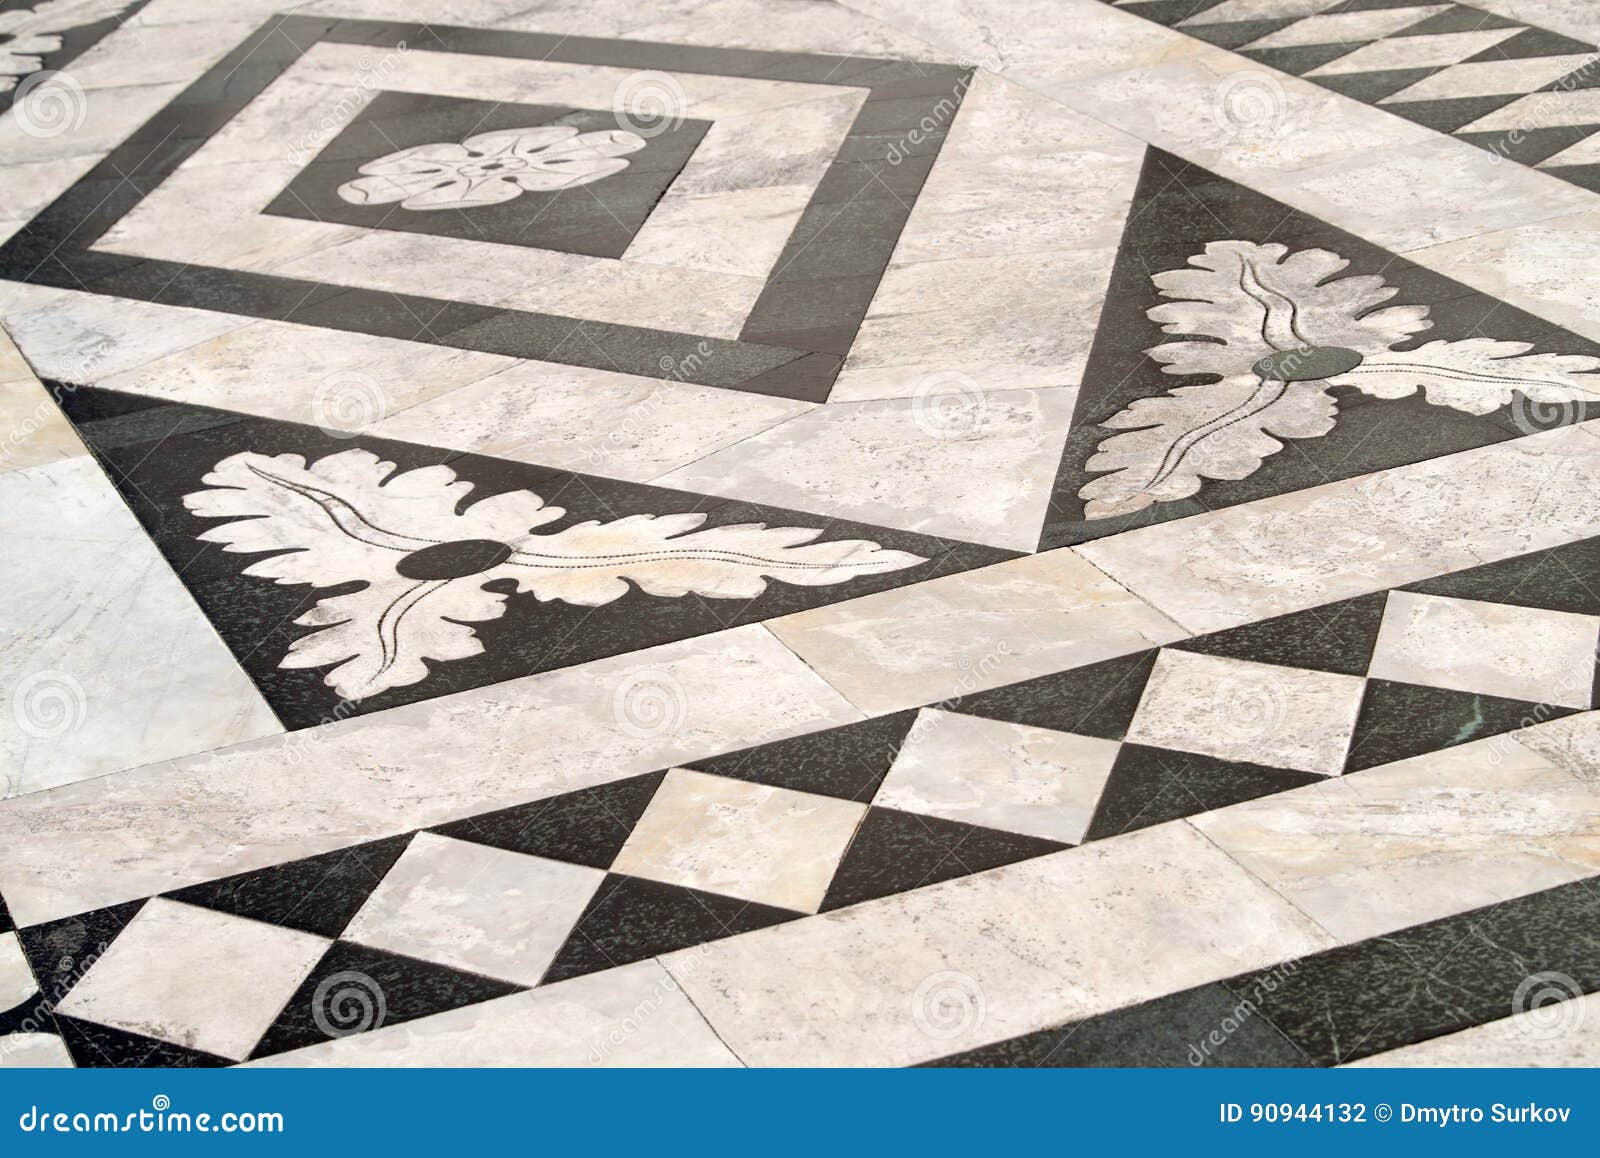 Exterior Marble Floor Of The Siena Cathedral Italy Stock Photo